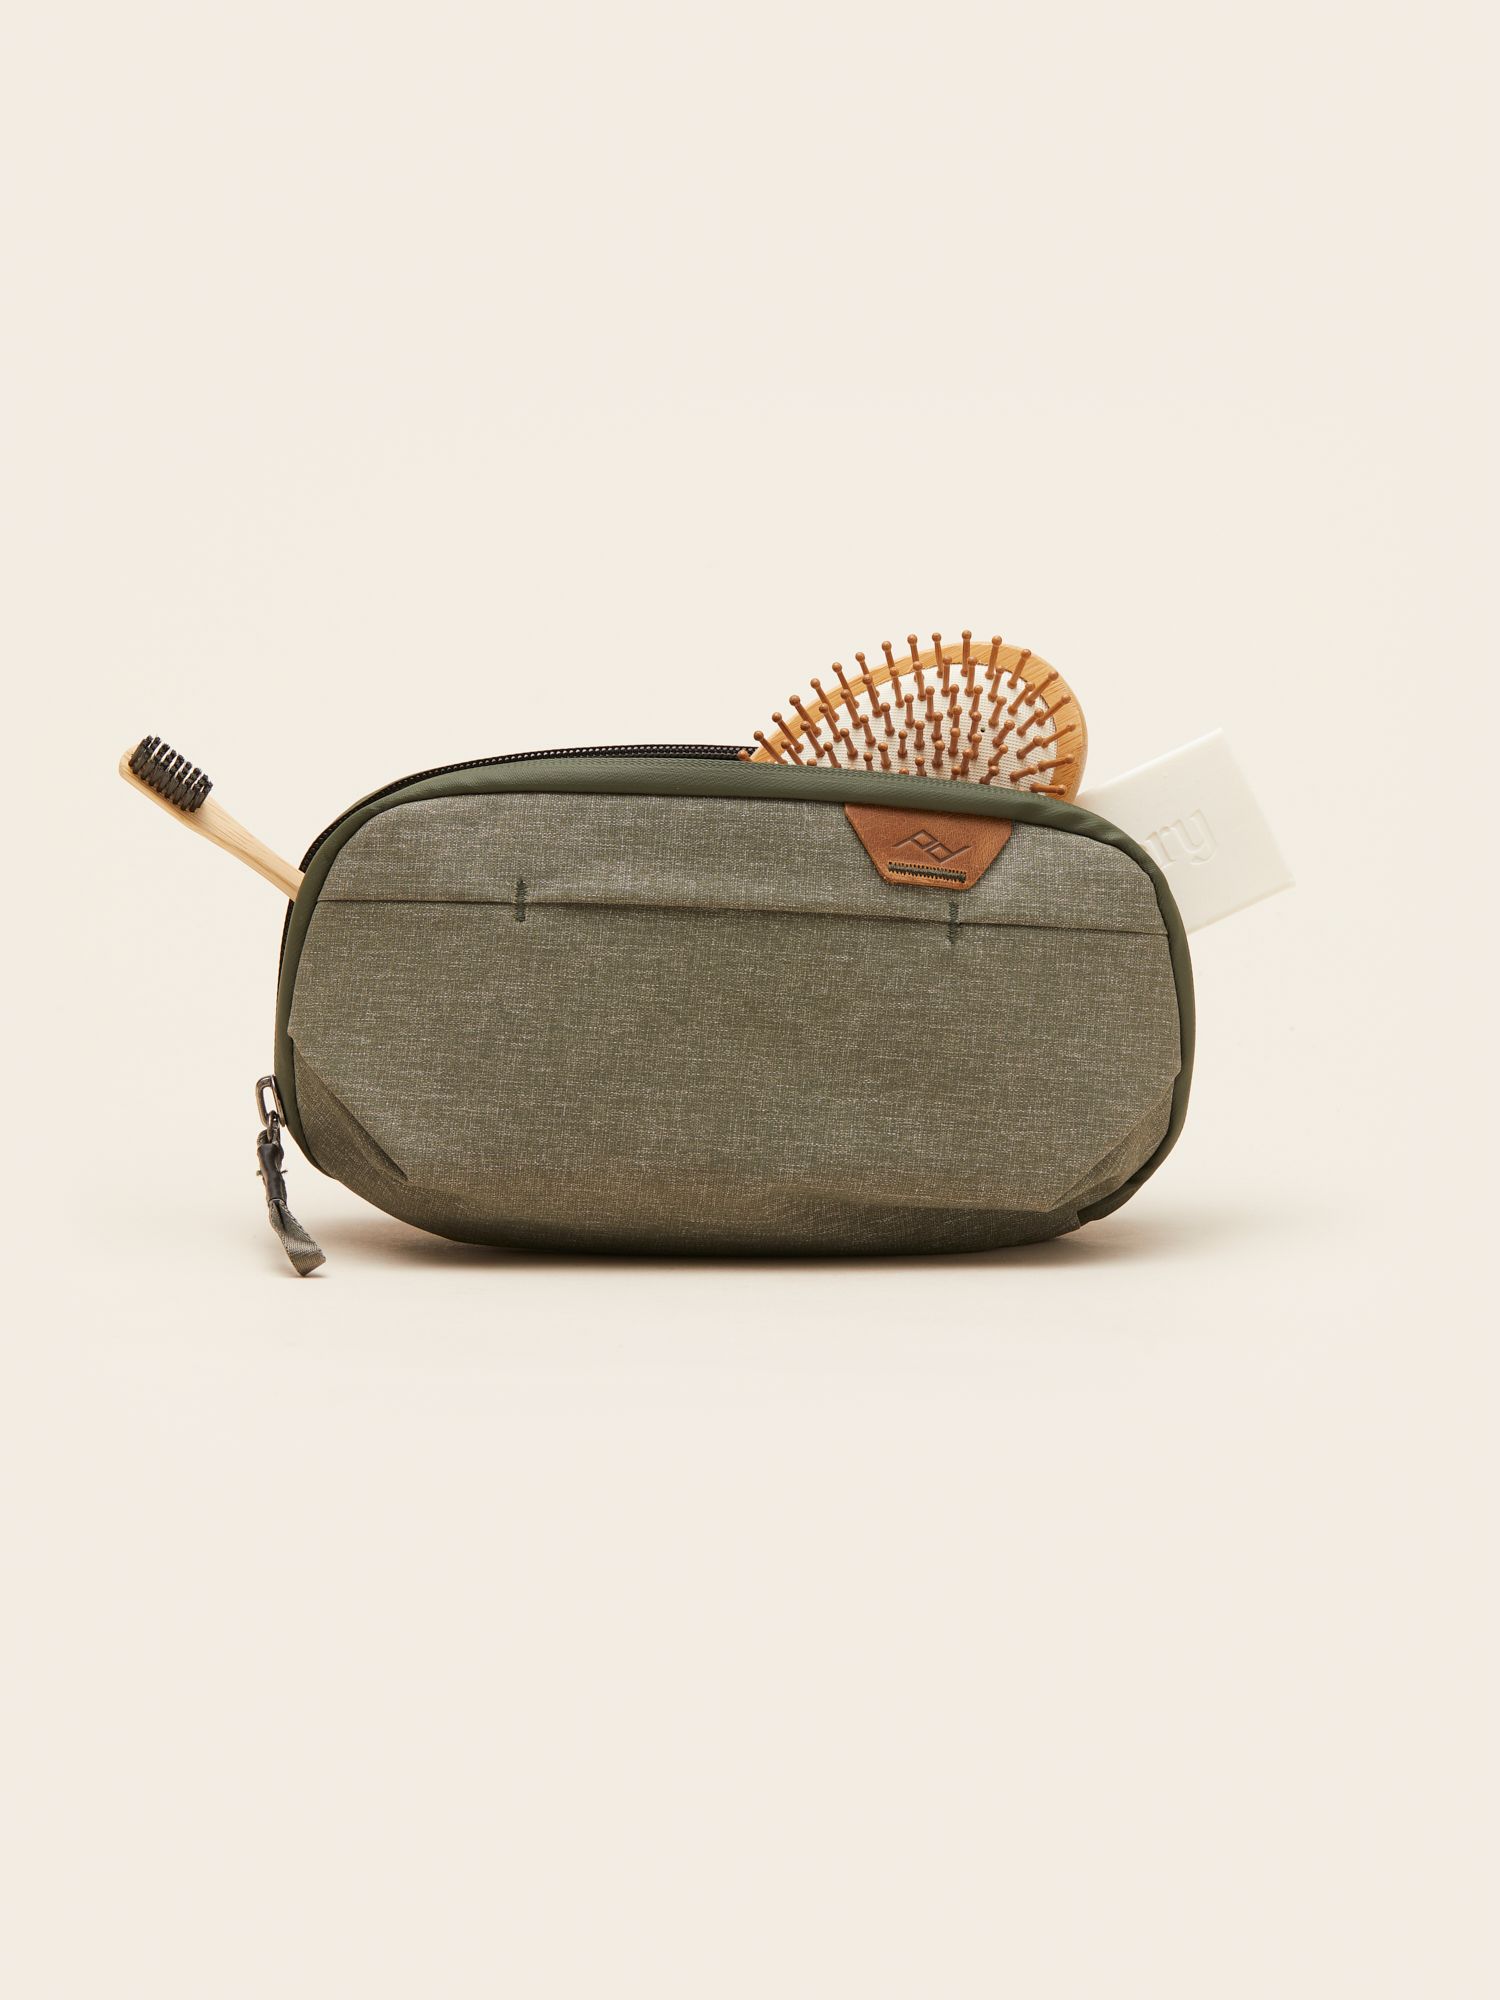 MERCHERY_MAY-2022_Peak design wash pouch_small_green_in situation.jpg